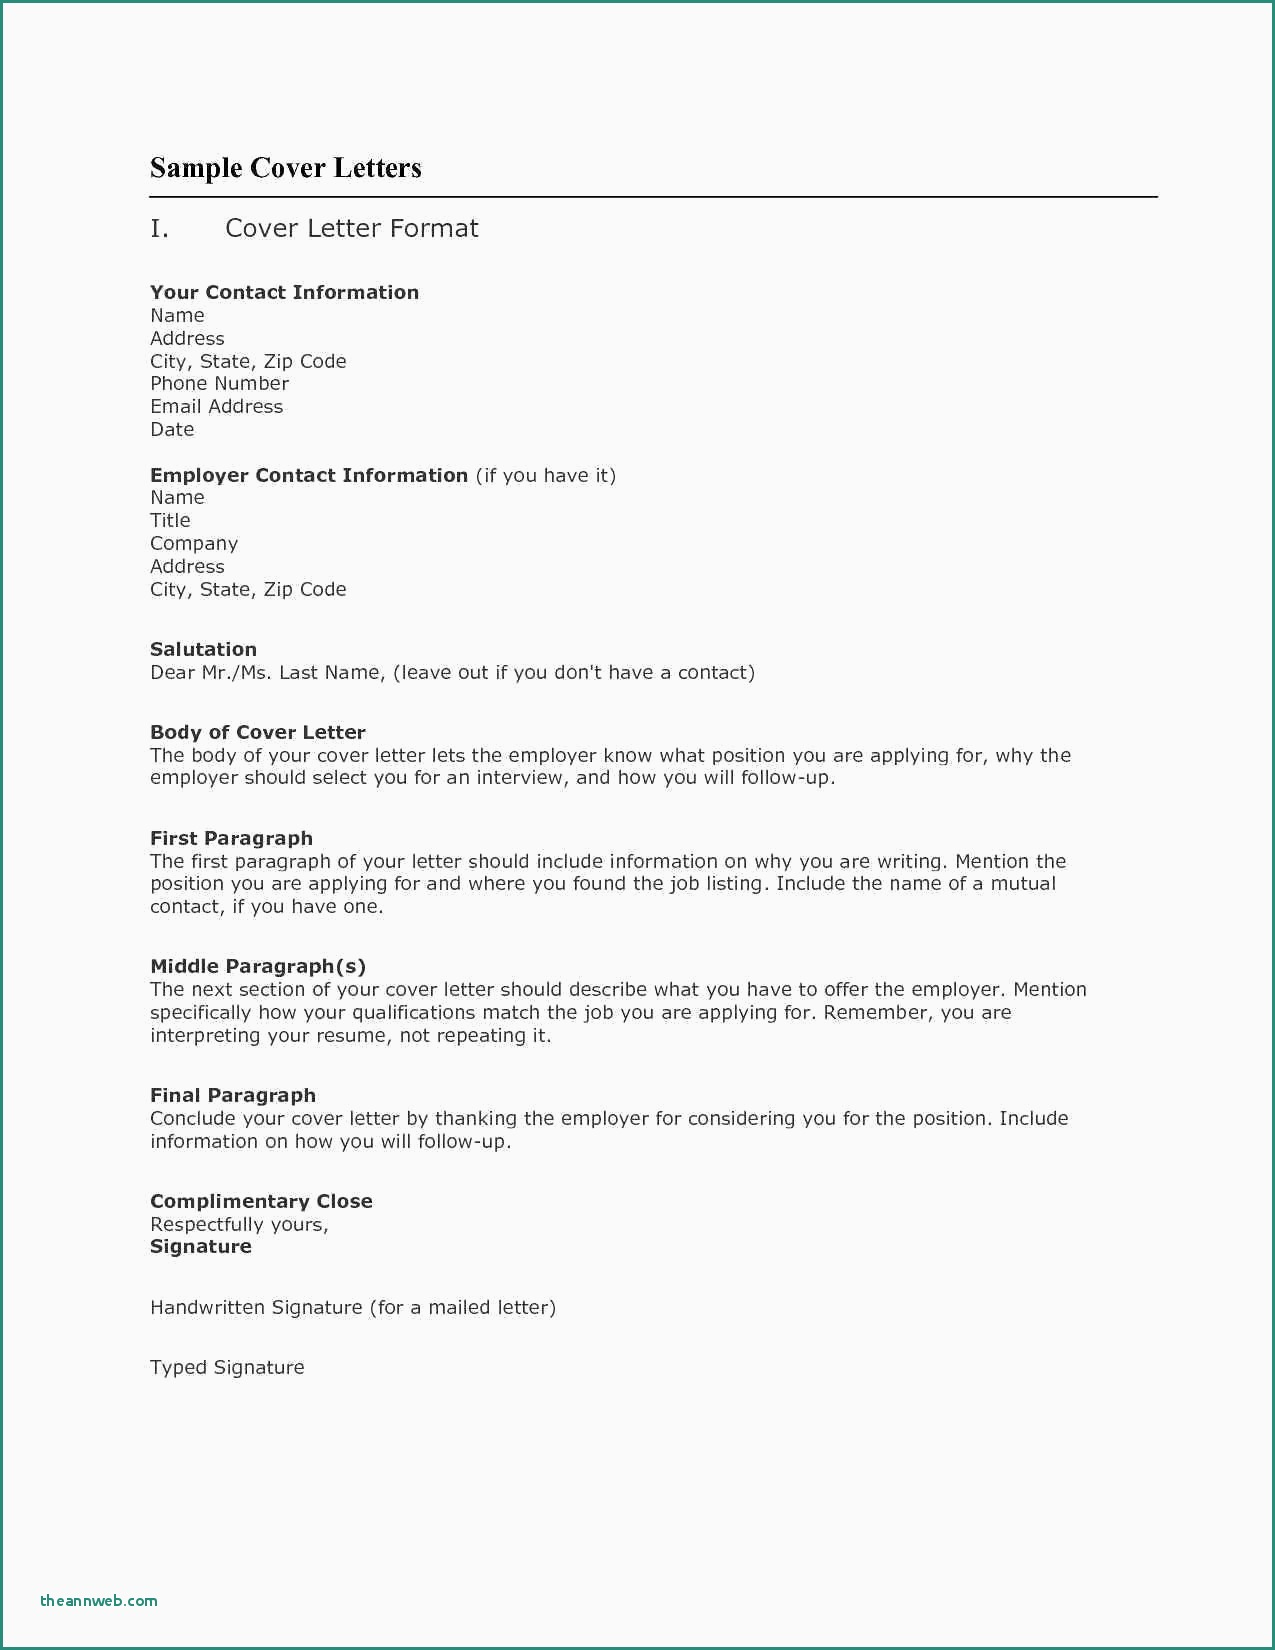 how to address cover letter without name